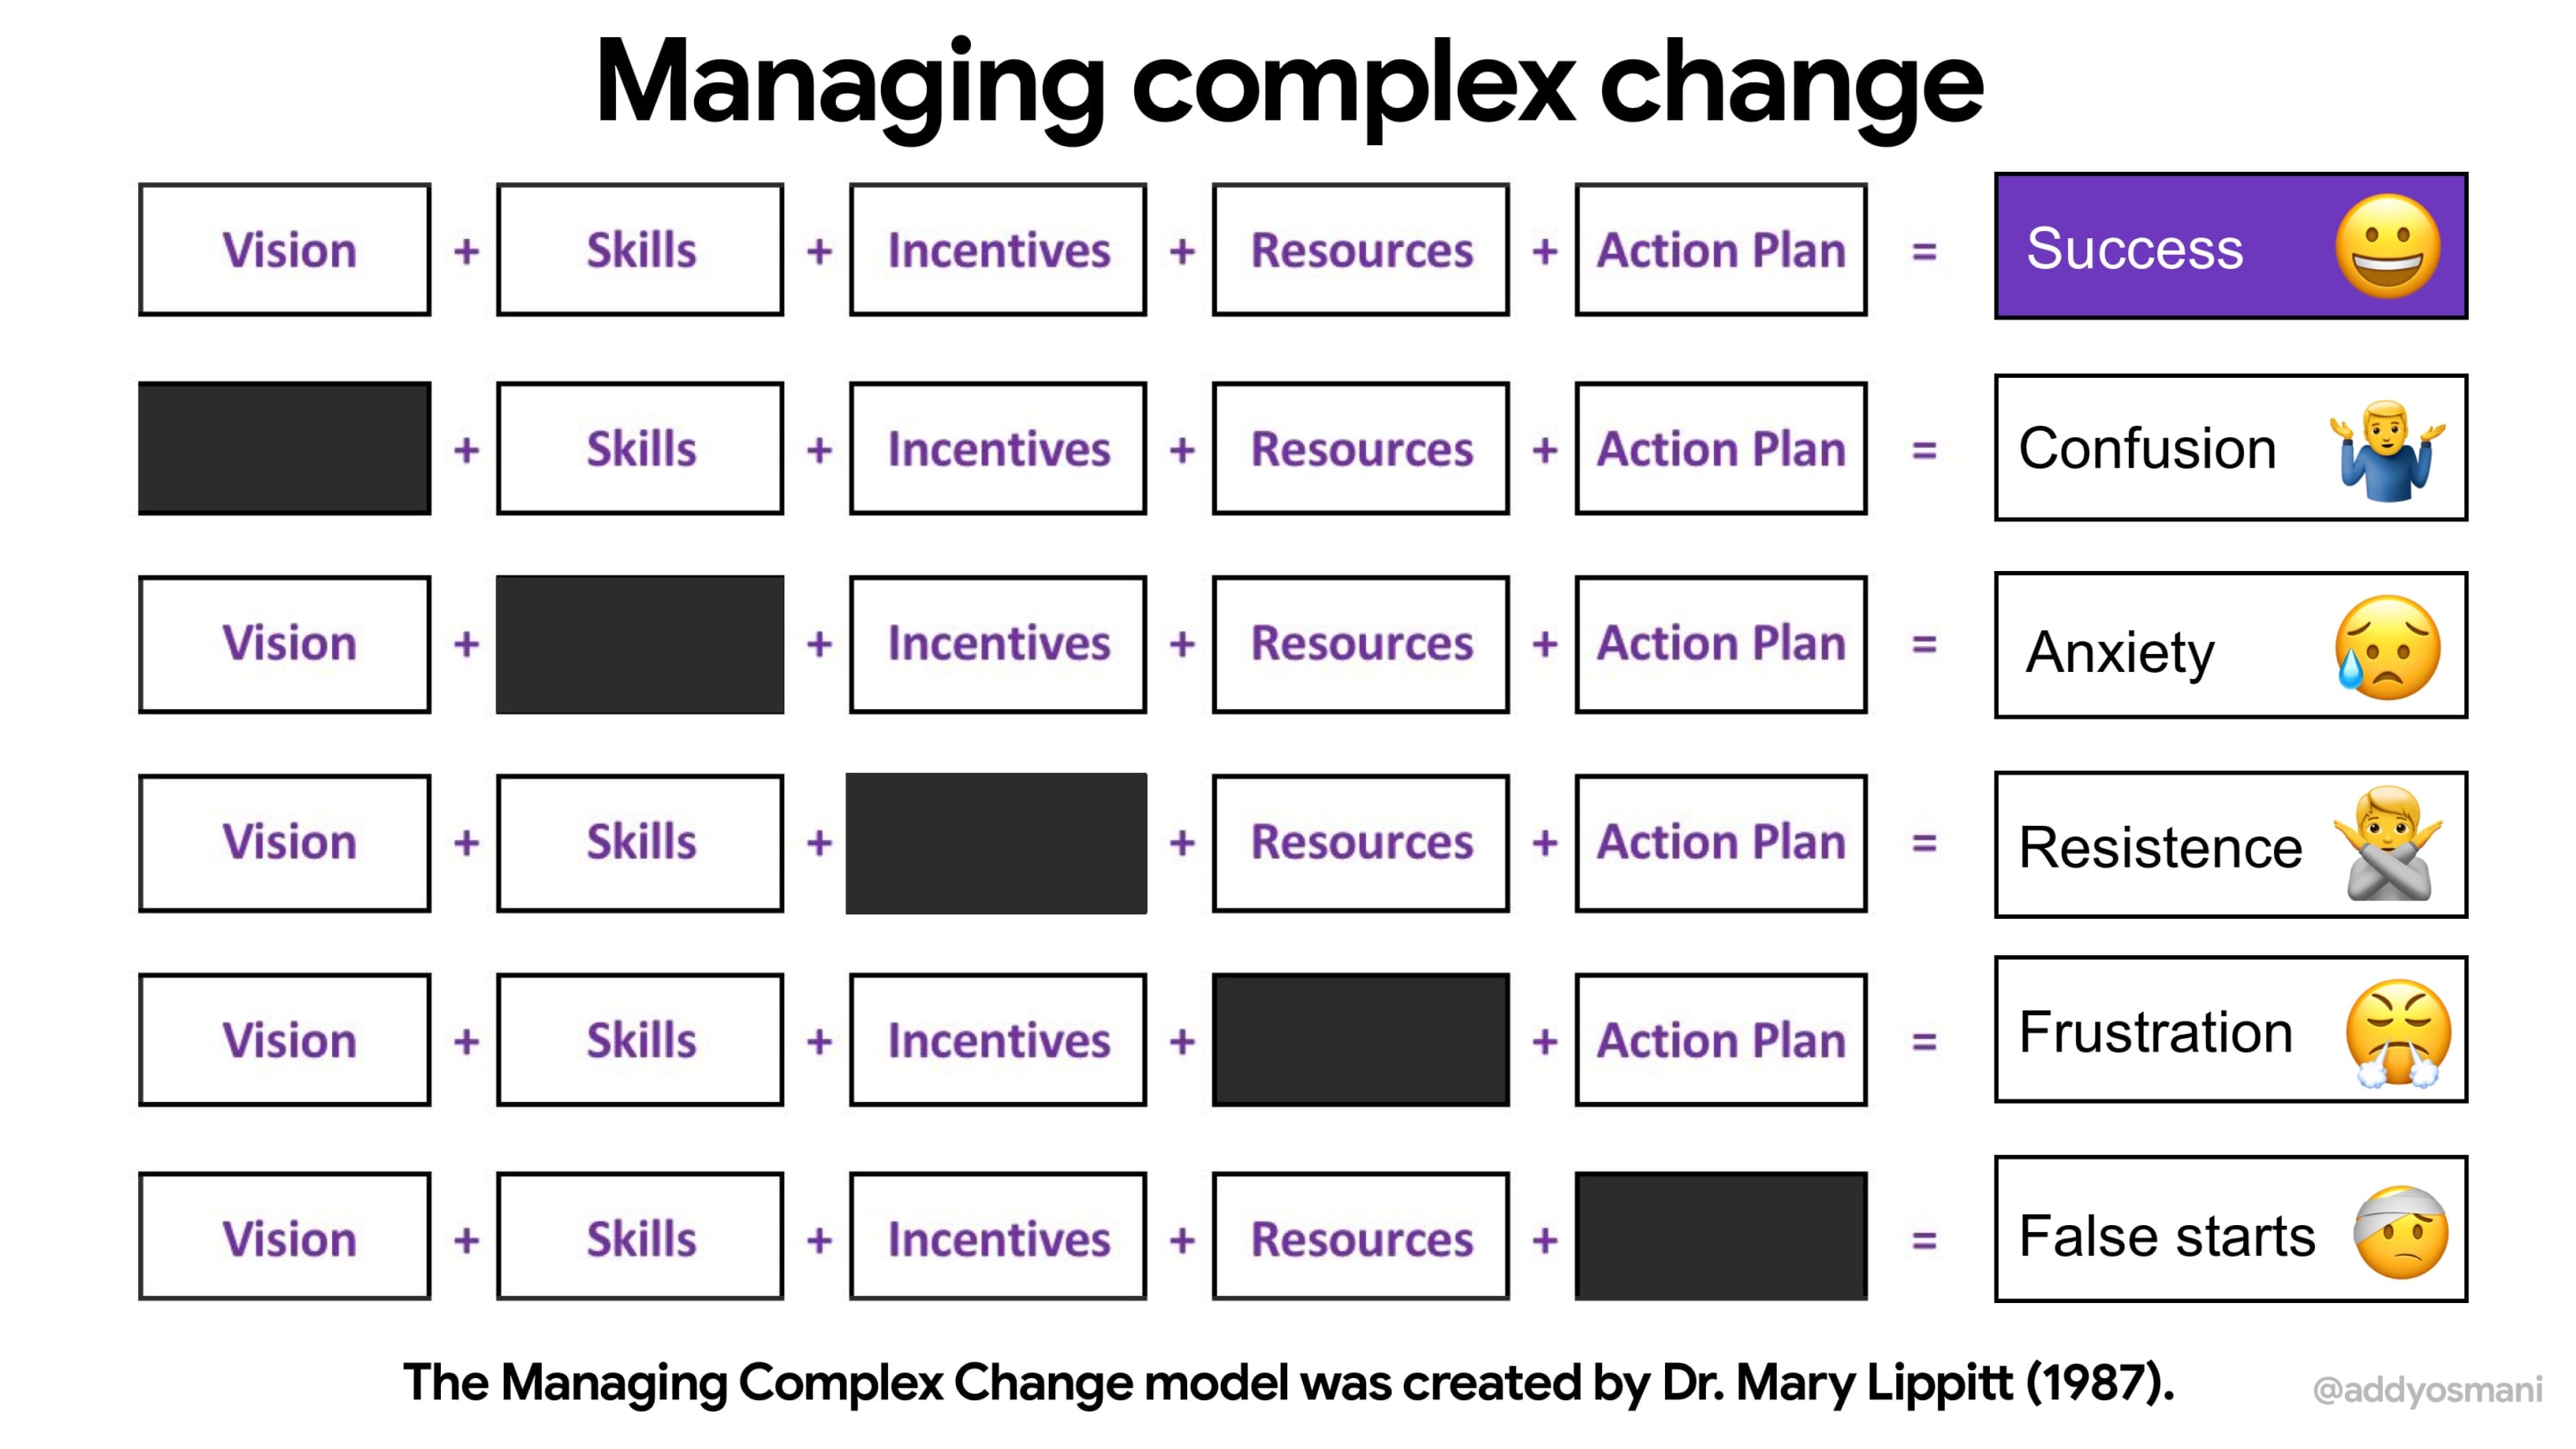 managing complex change as shown in this model by mary lippett